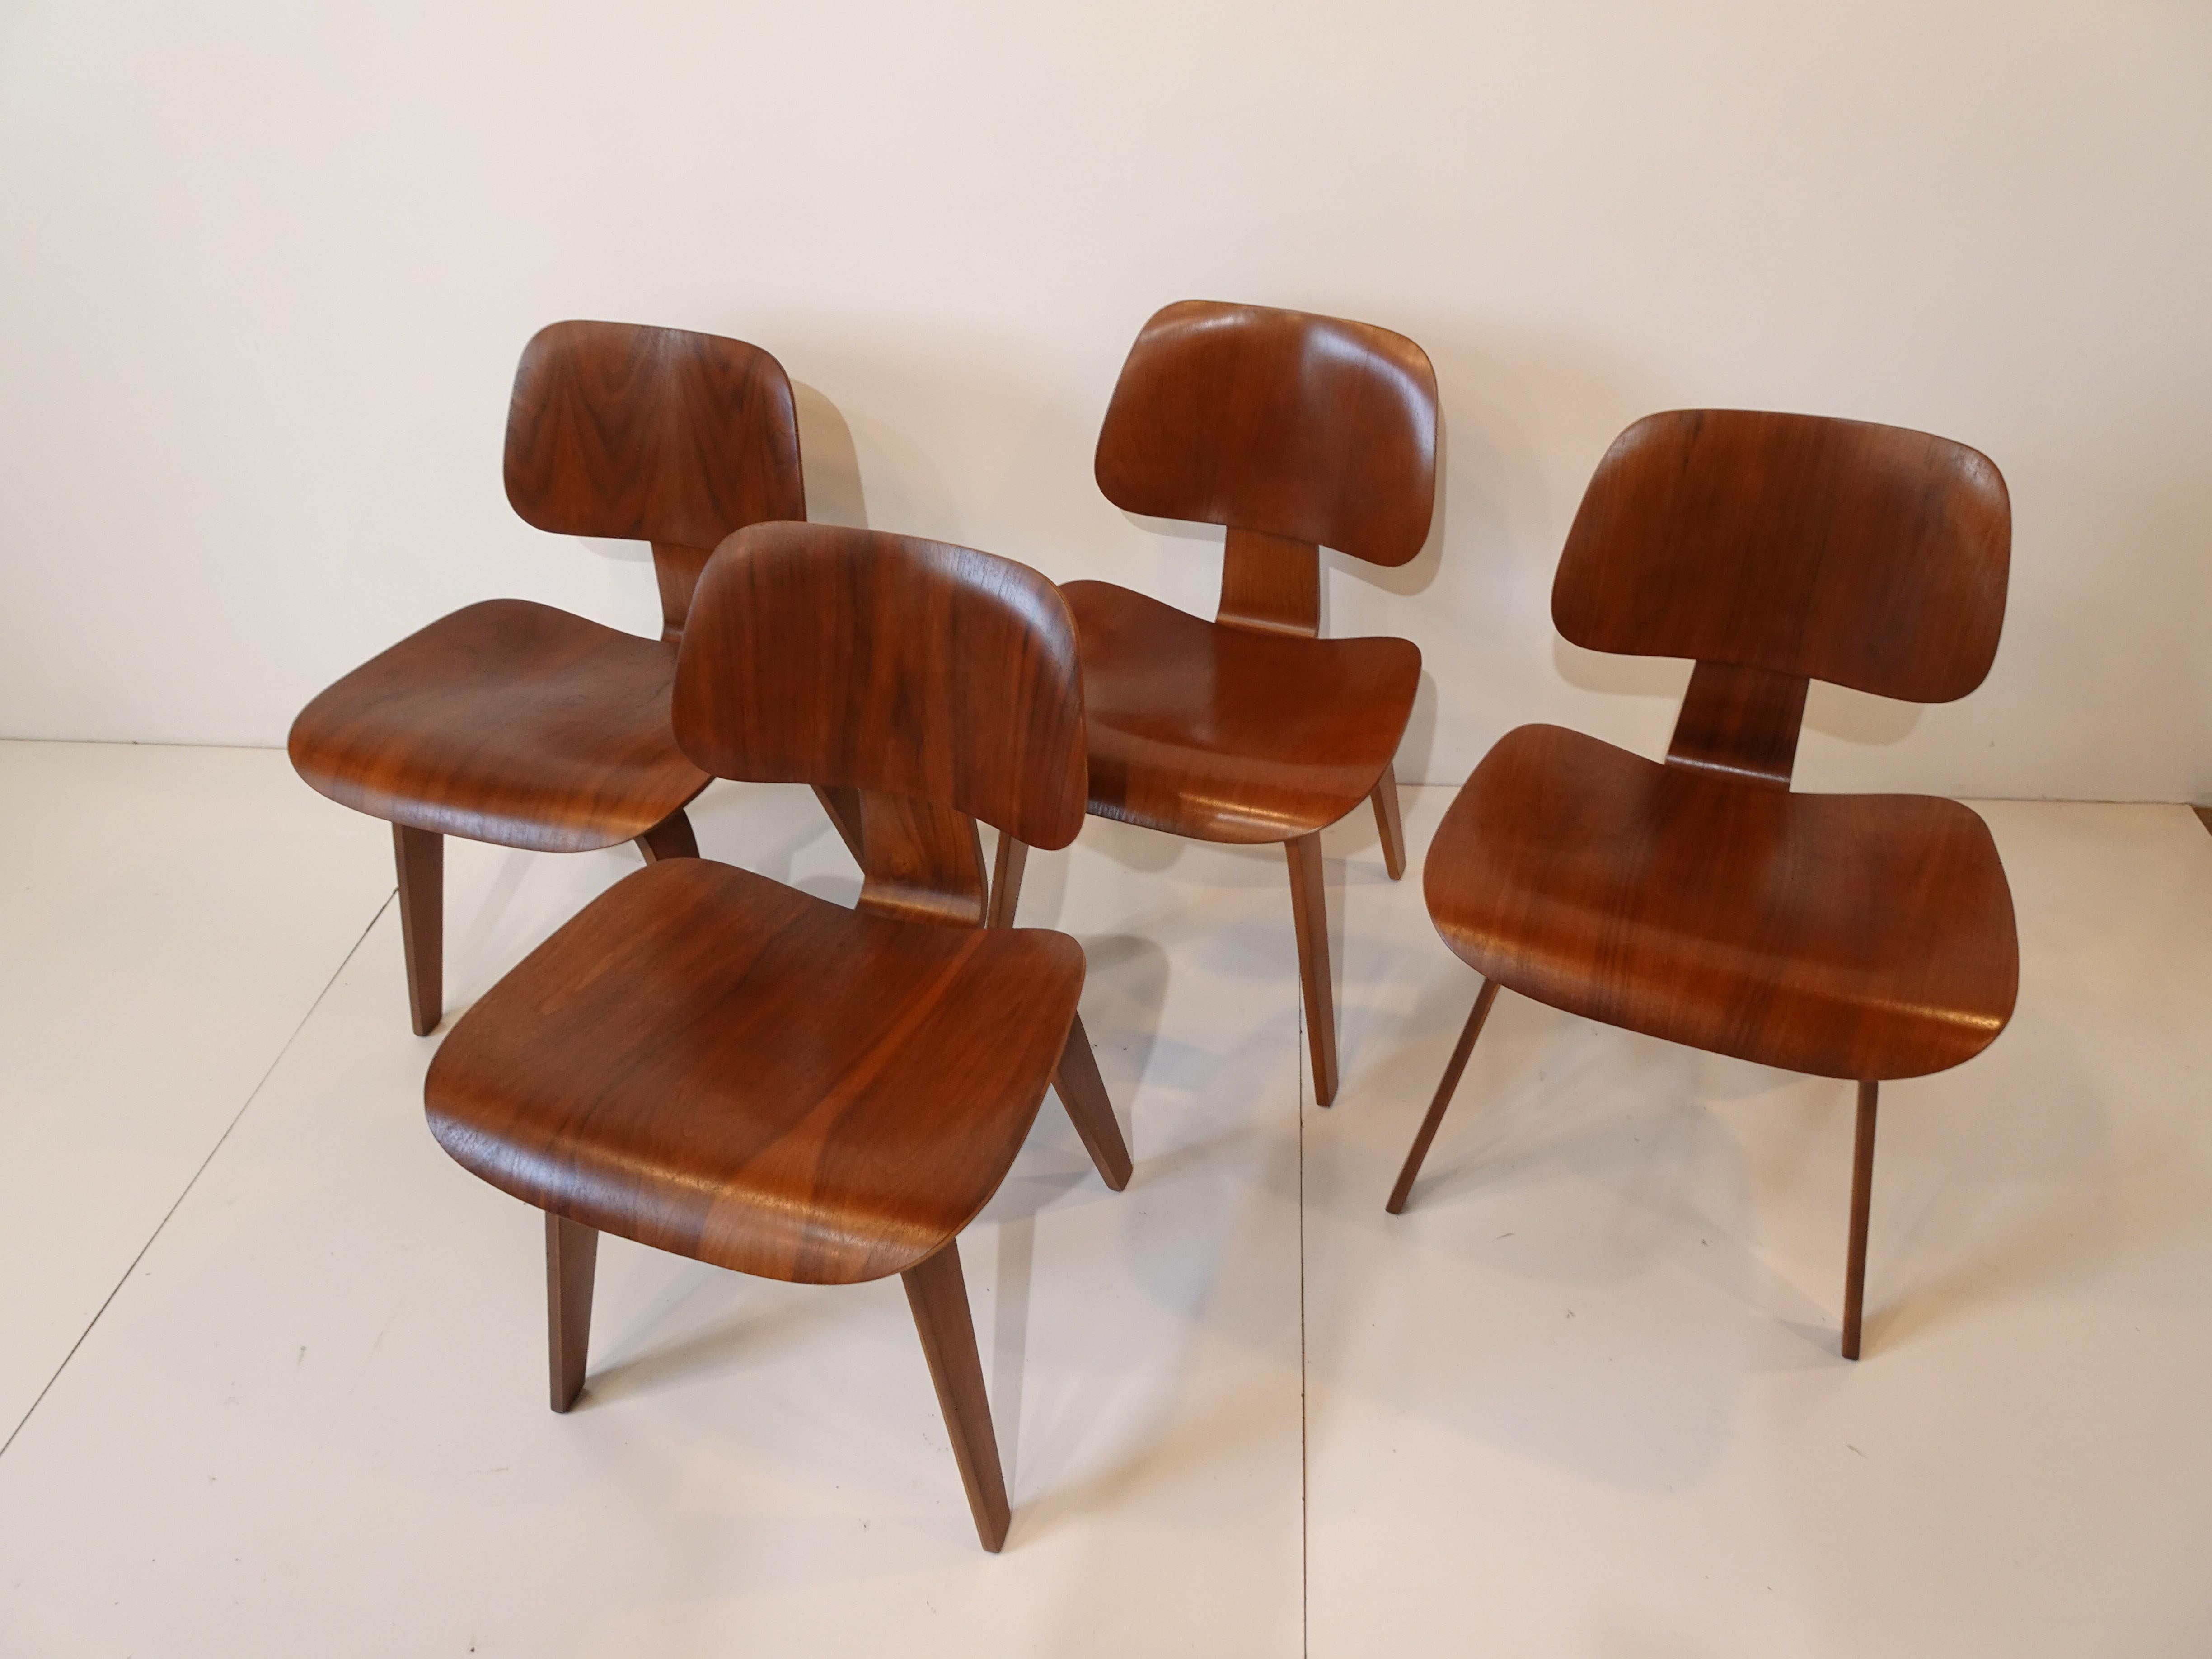 A set of four early sculptural walnut DCW (dining chairs wood) having beautiful compound curves designed by the husband and wife team of Ray and Charles Eames. Winning first place in the 'organic Design in Home furnishings' competition in the 1940's